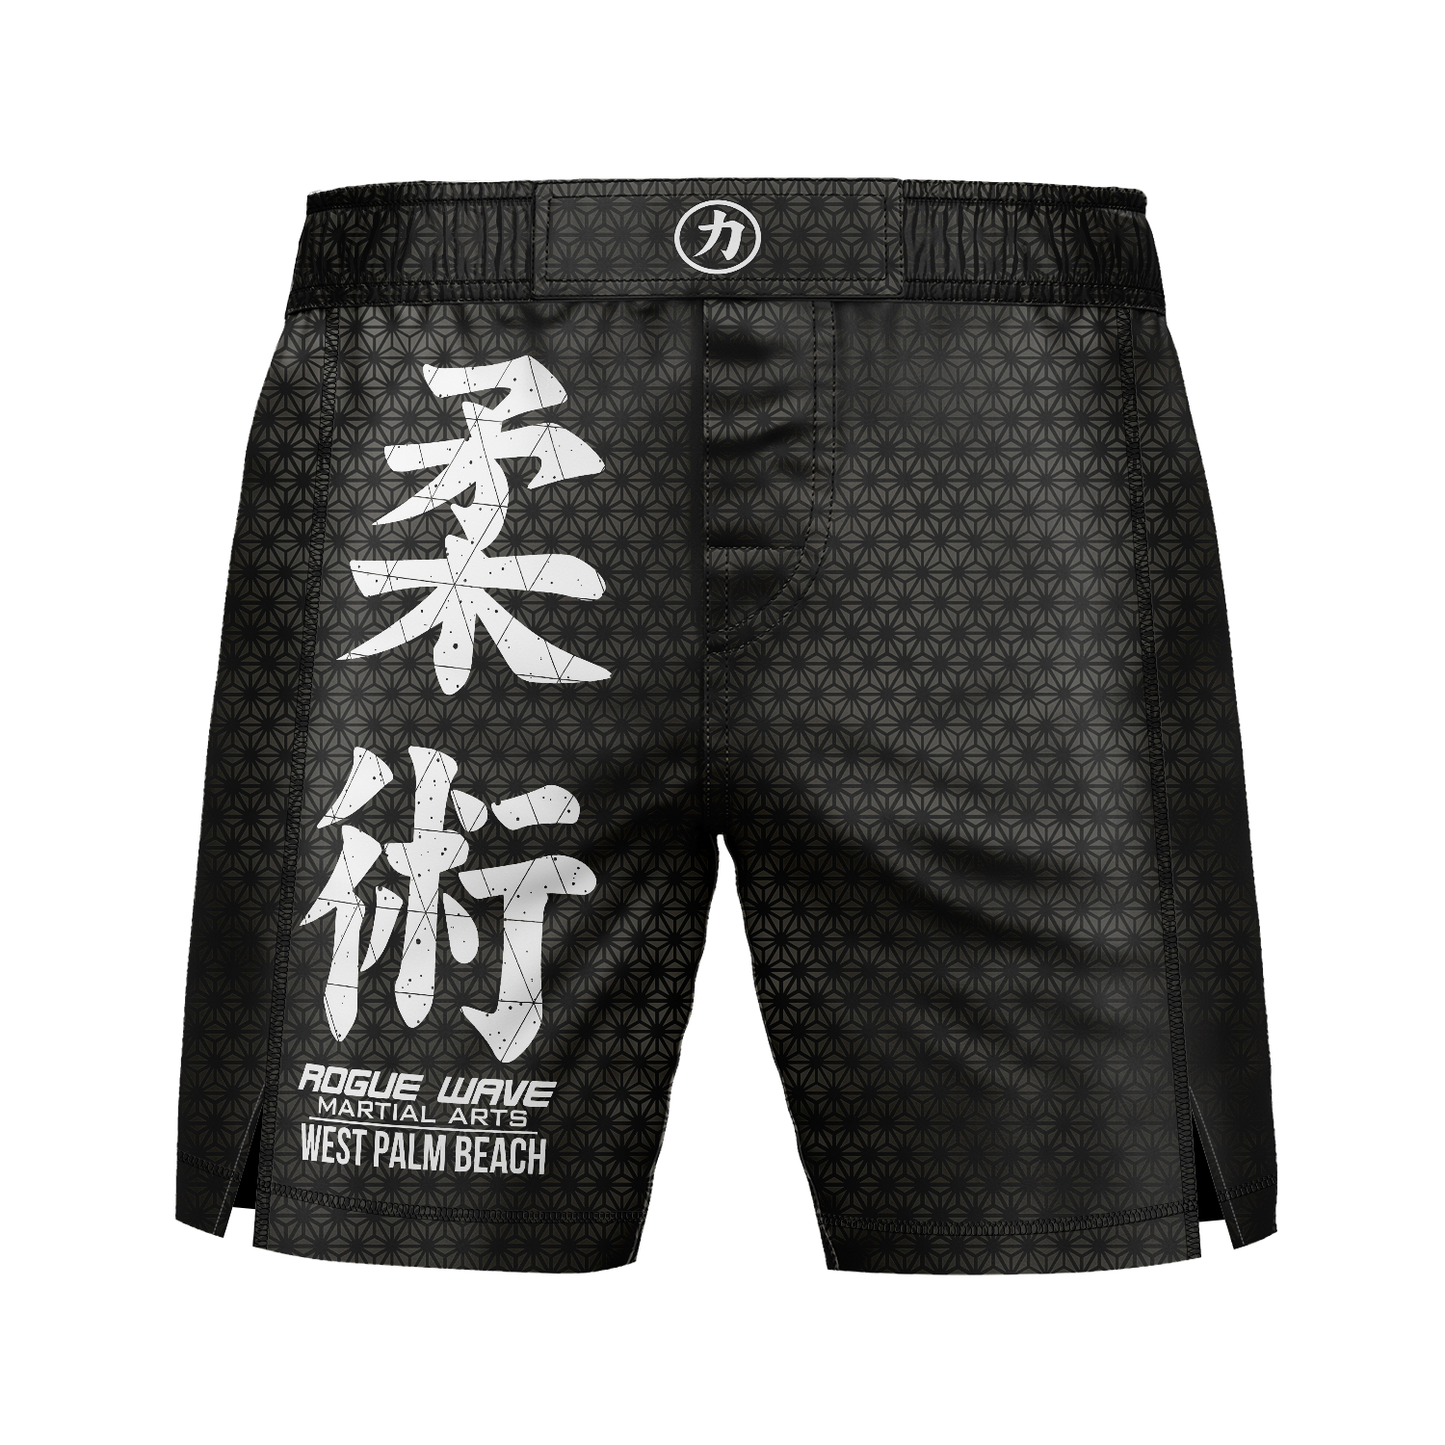 Rogue Wave men's fight shorts Fractal, white and black